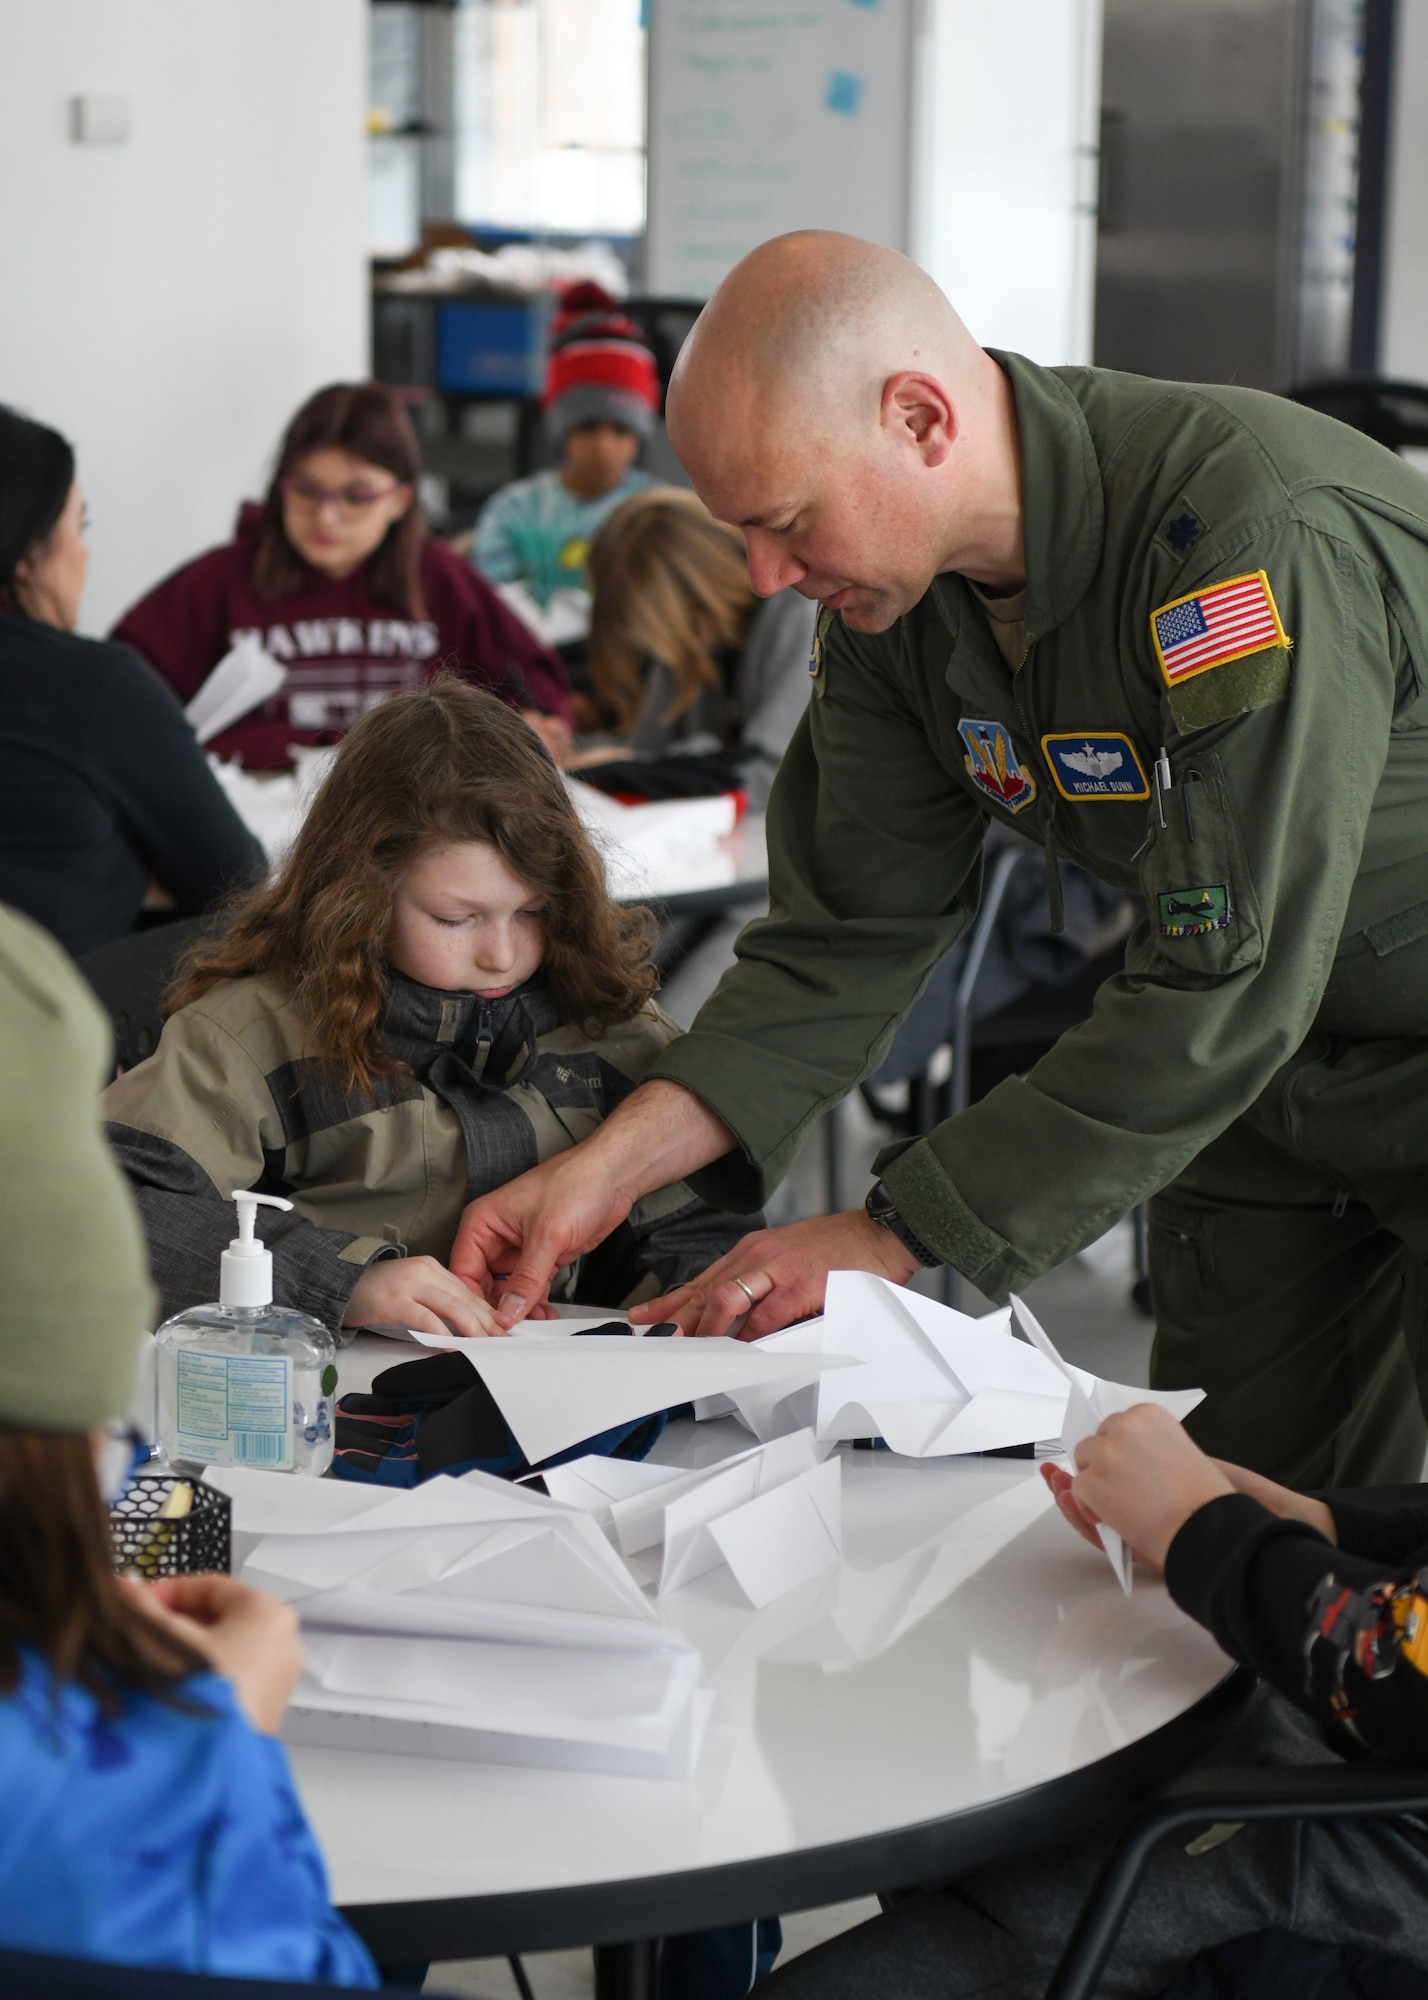 A man in a green uniform helps a child in a green coat with making a paper airplane